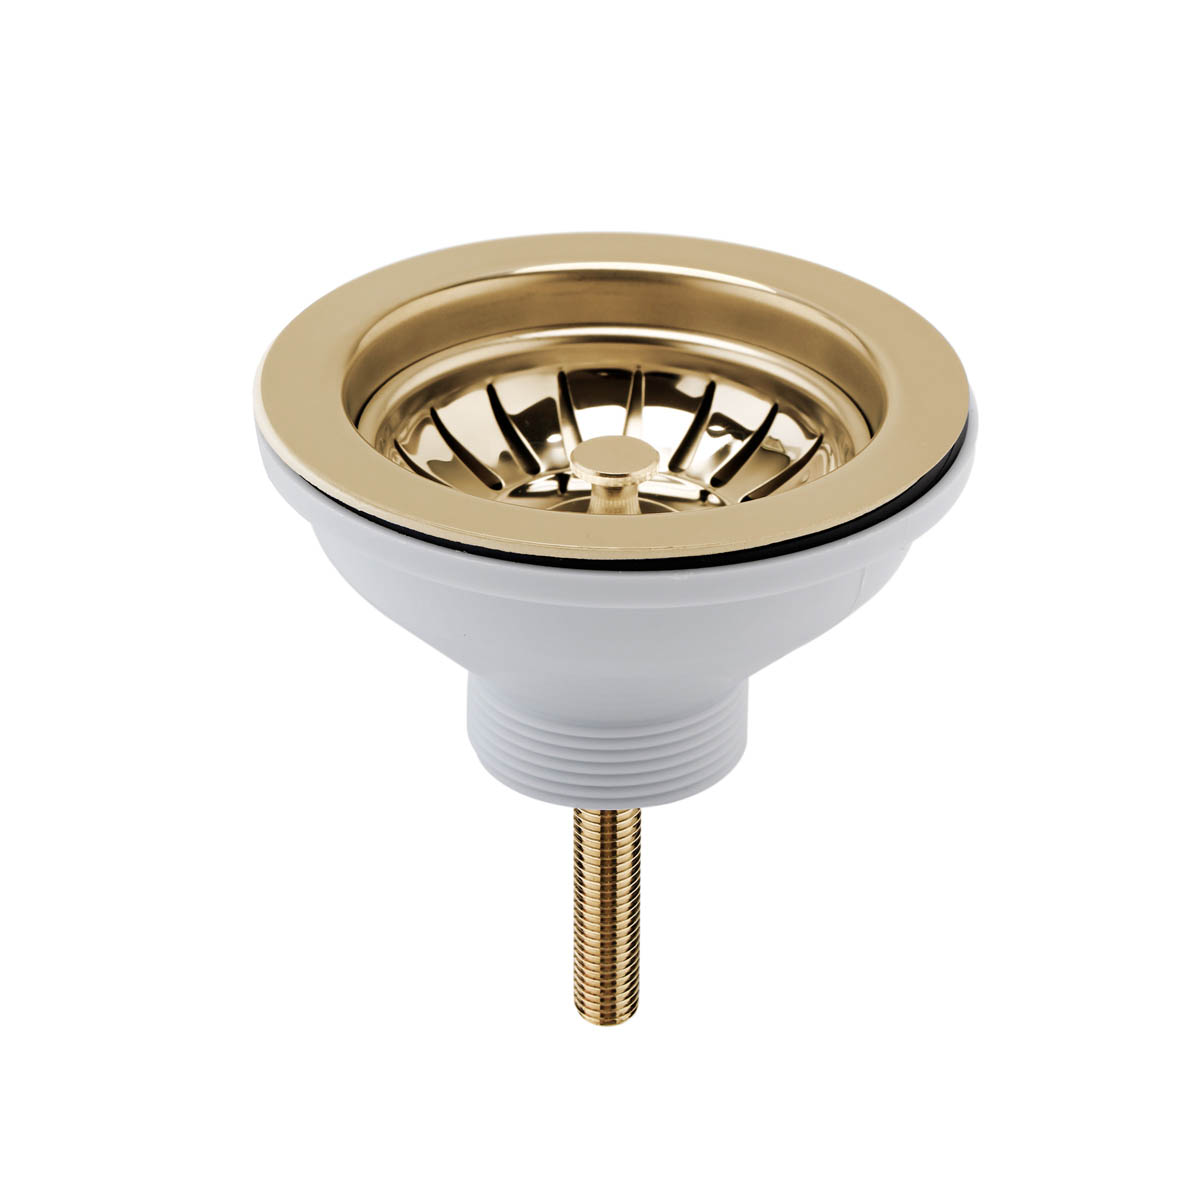 Nuie Strainer with Pull Out Basket - Brushed Brass (20385)